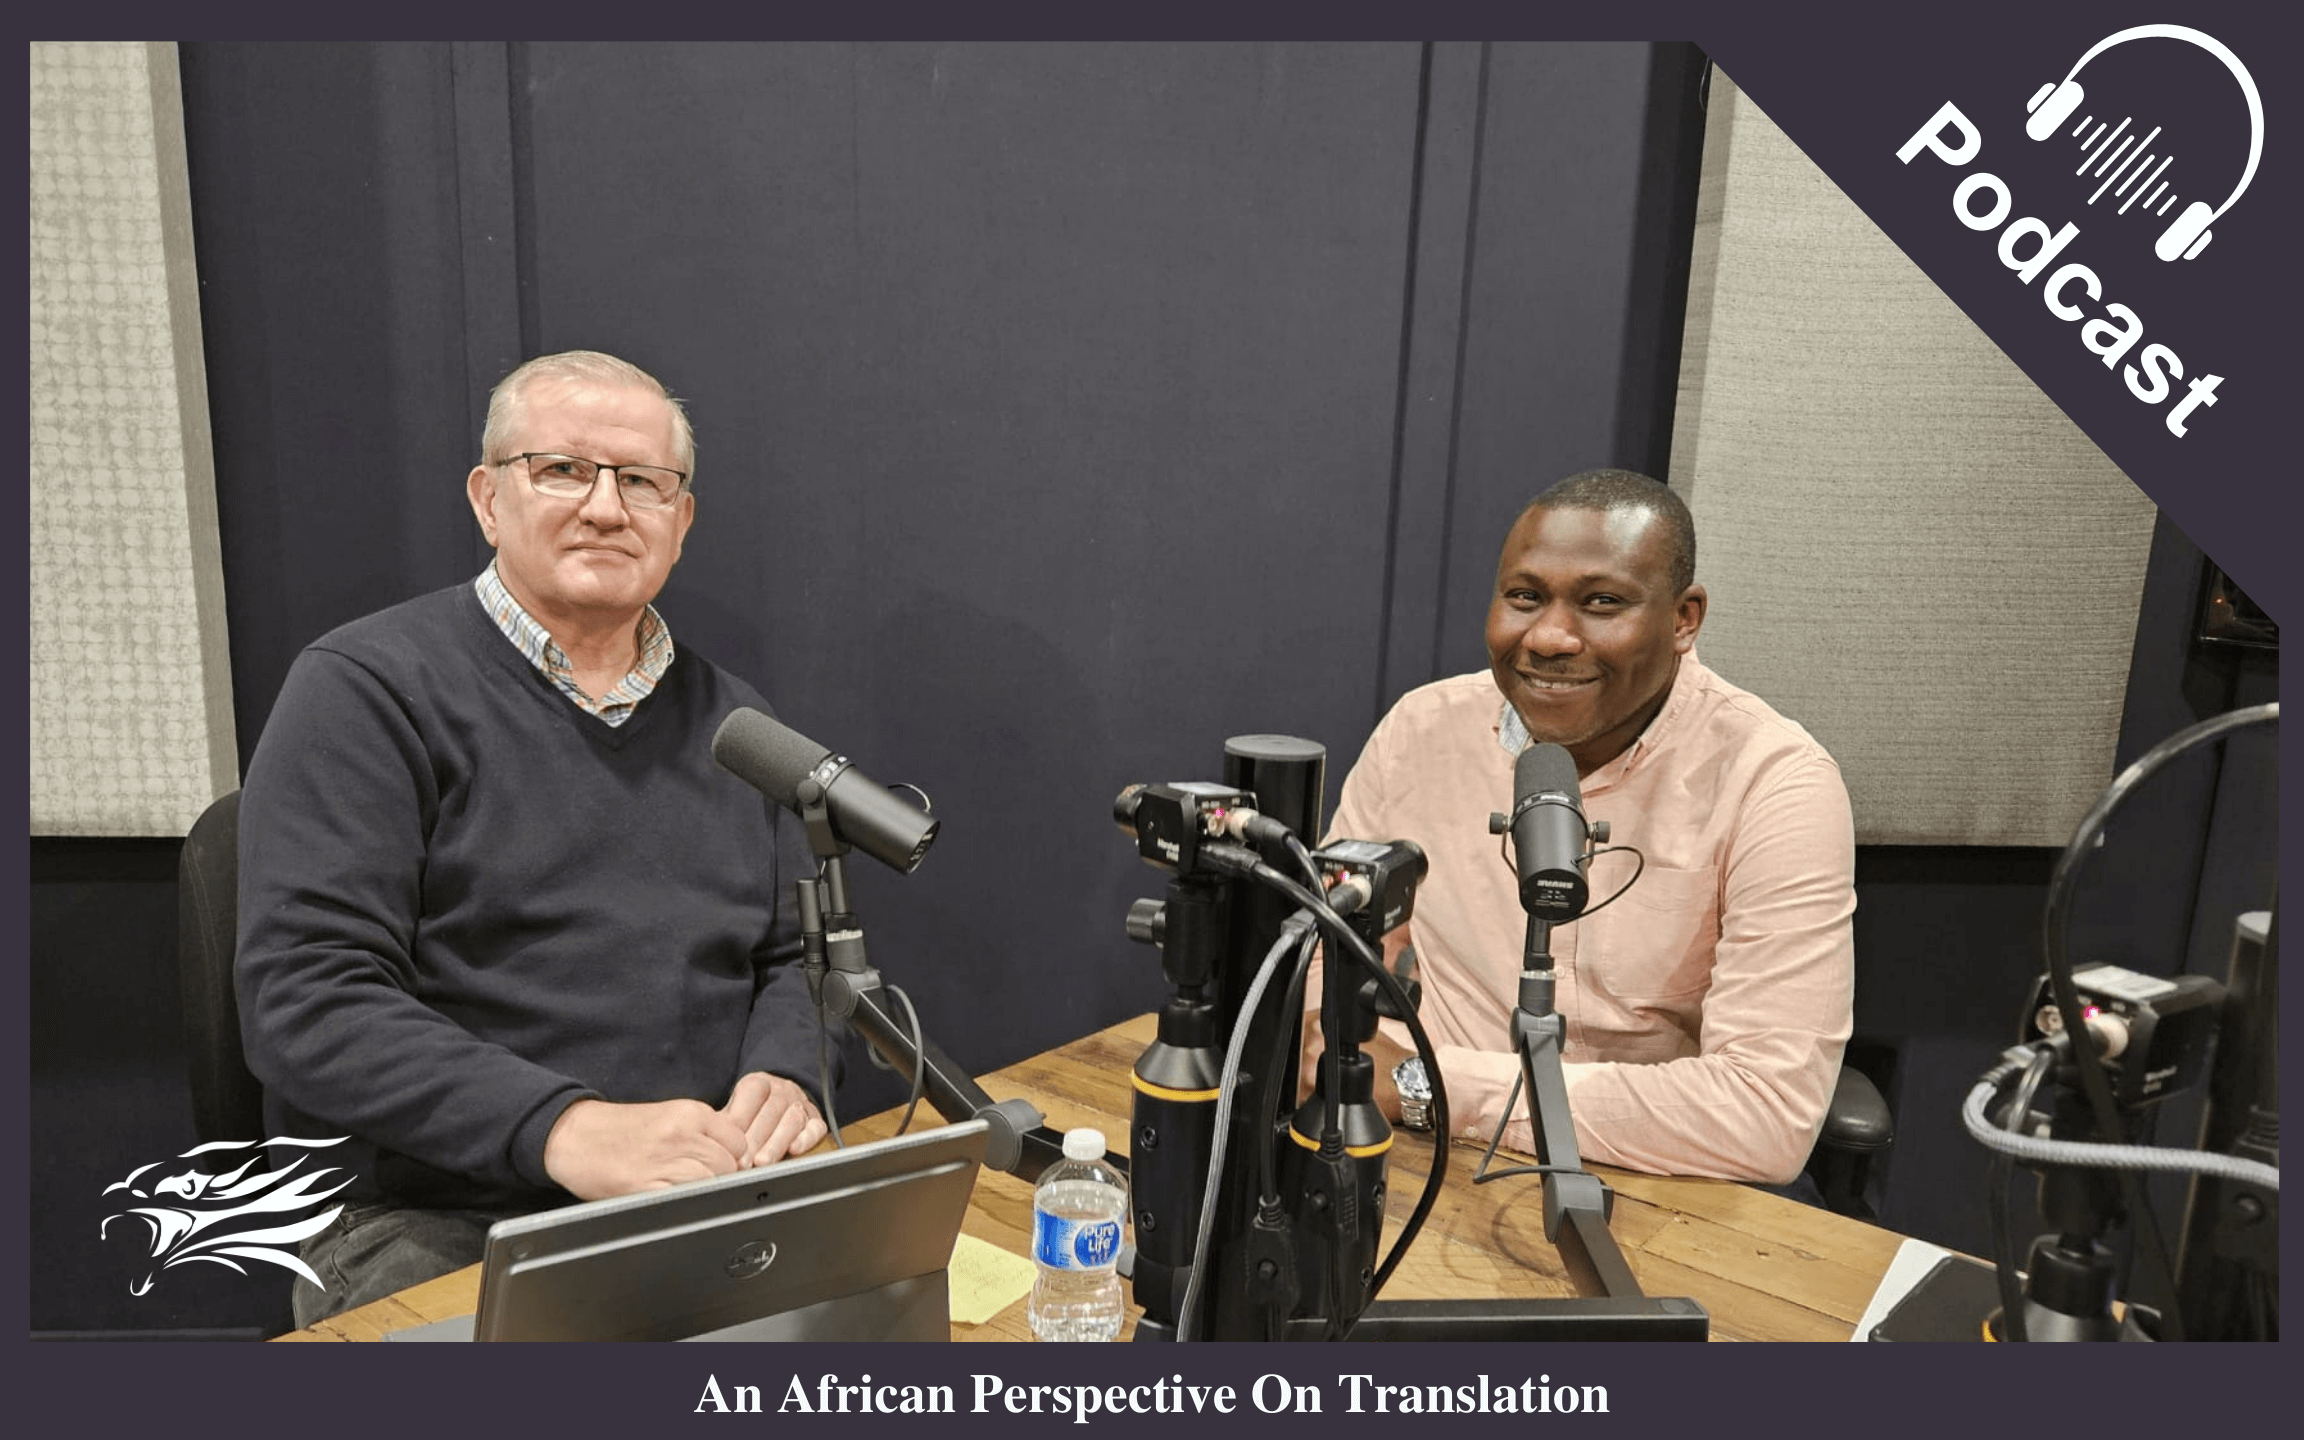 Podcast: An African Perspective On Translation